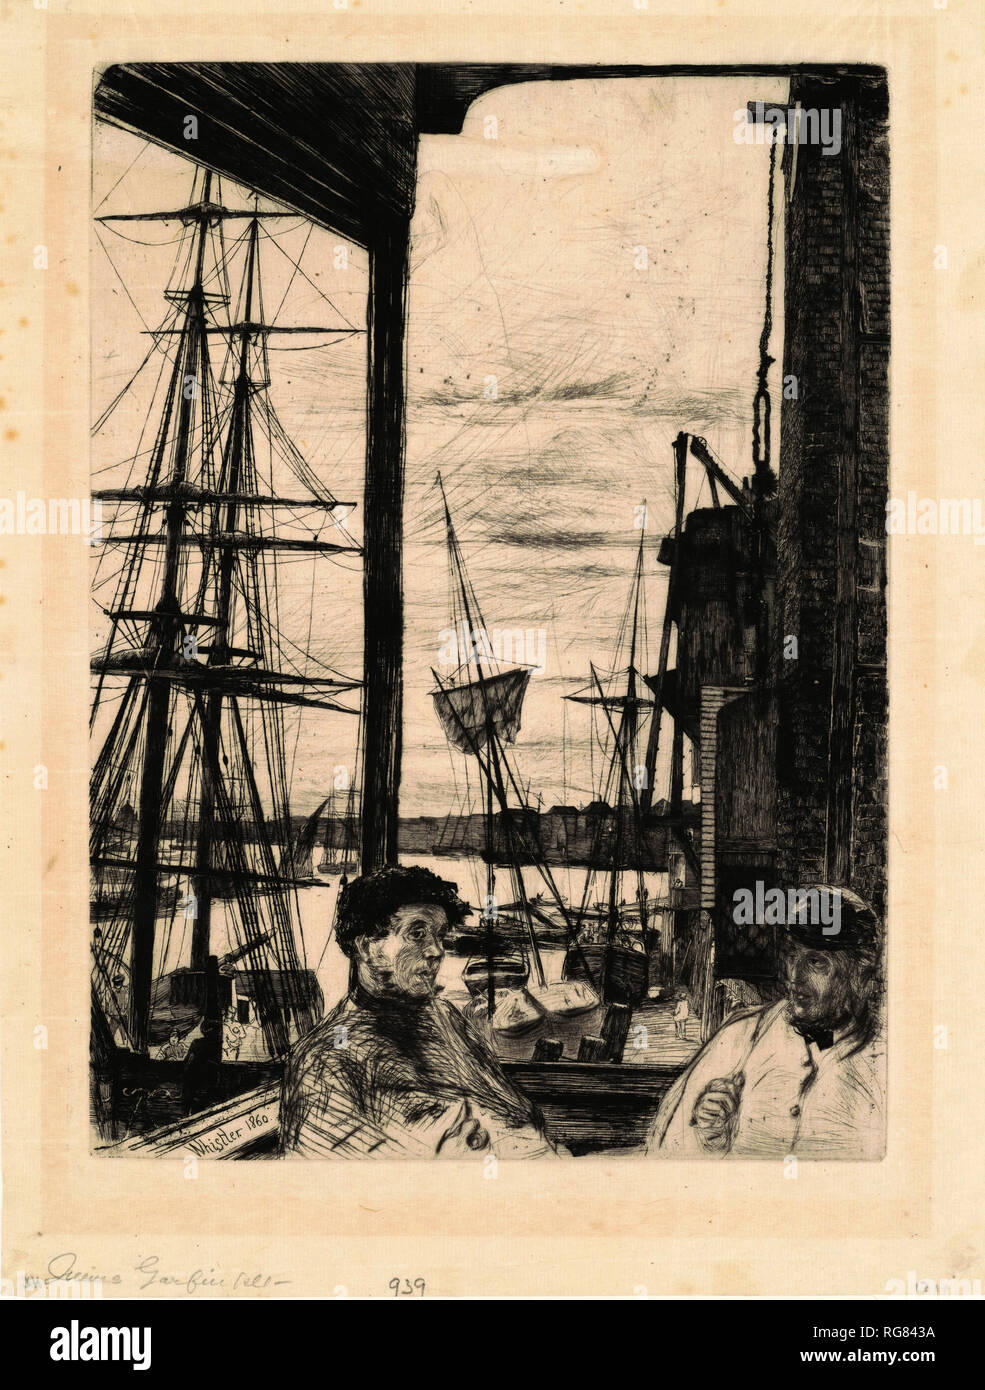 Rotherhithe. Dated: 1860. Dimensions: plate: 27.31 × 20 cm (10 3/4 × 7 7/8 in.)  sheet: 33.81 × 24.77 cm (13 5/16 × 9 3/4 in.). Medium: etching and drypoint on laid paper. Museum: National Gallery of Art, Washington DC. Author: WHISTLER, JAMES ABBOTT MCNEILL. Stock Photo